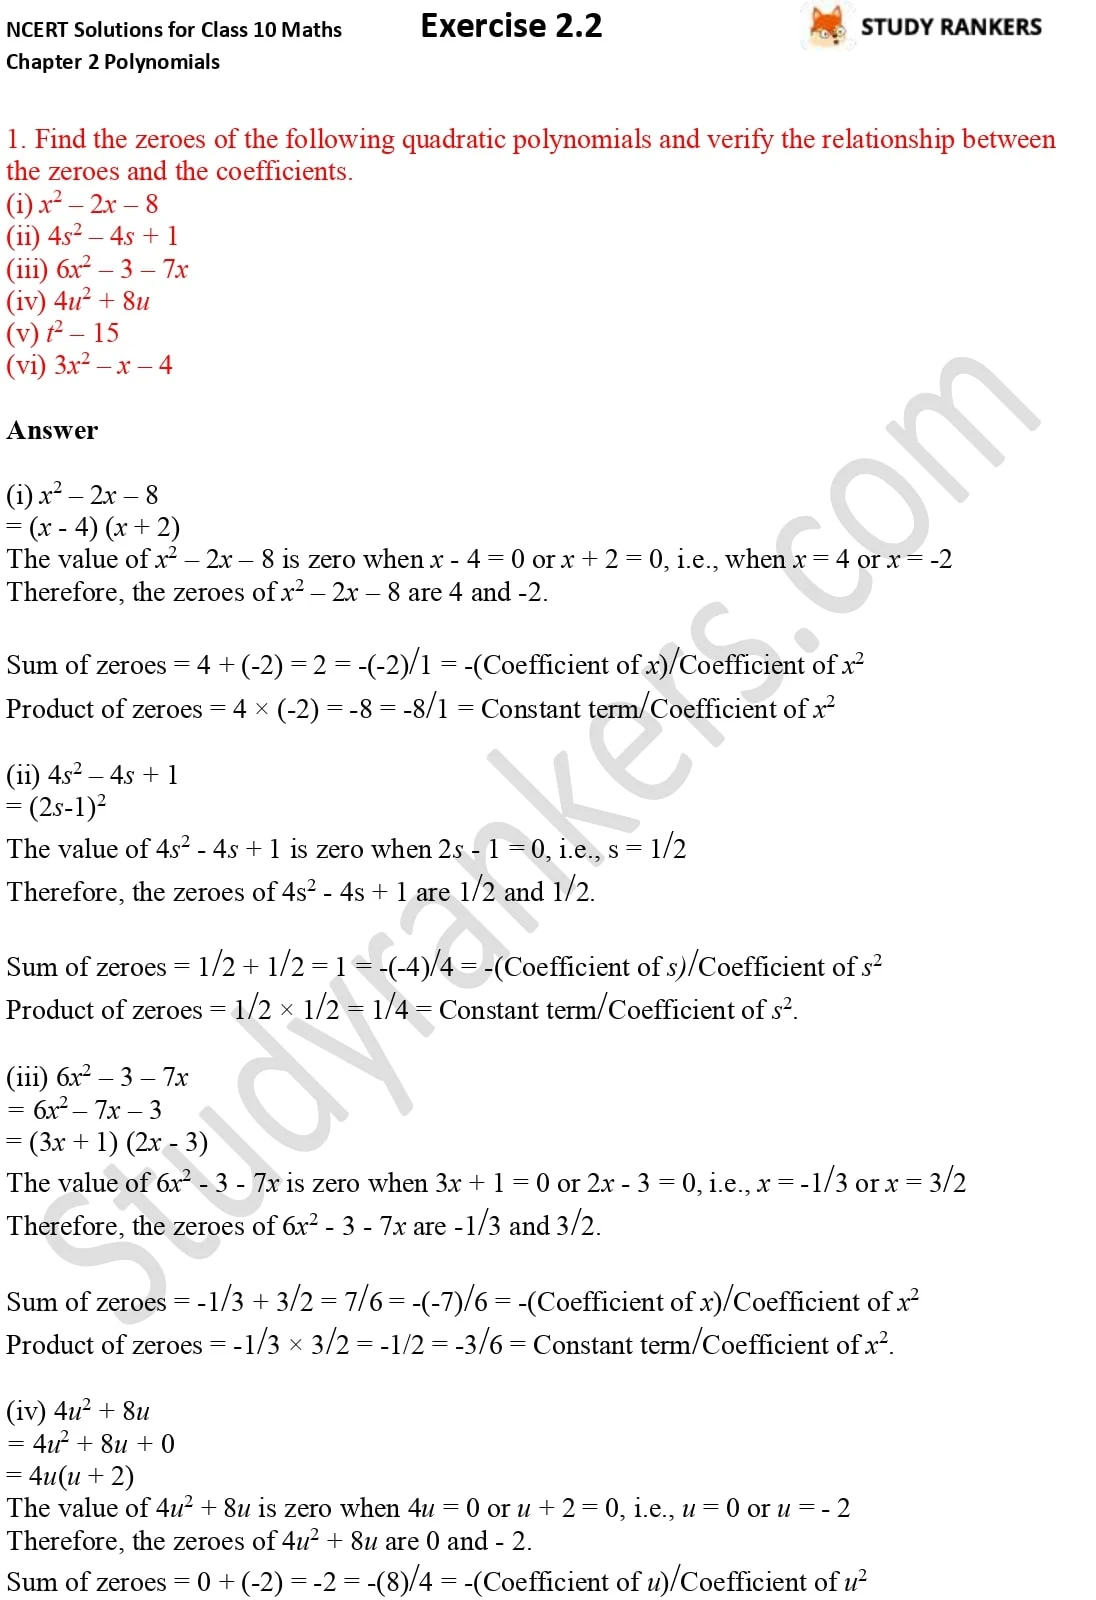 NCERT Solutions for Class 10 Maths Chapter 2 Polynomials Exercise 2.2 1